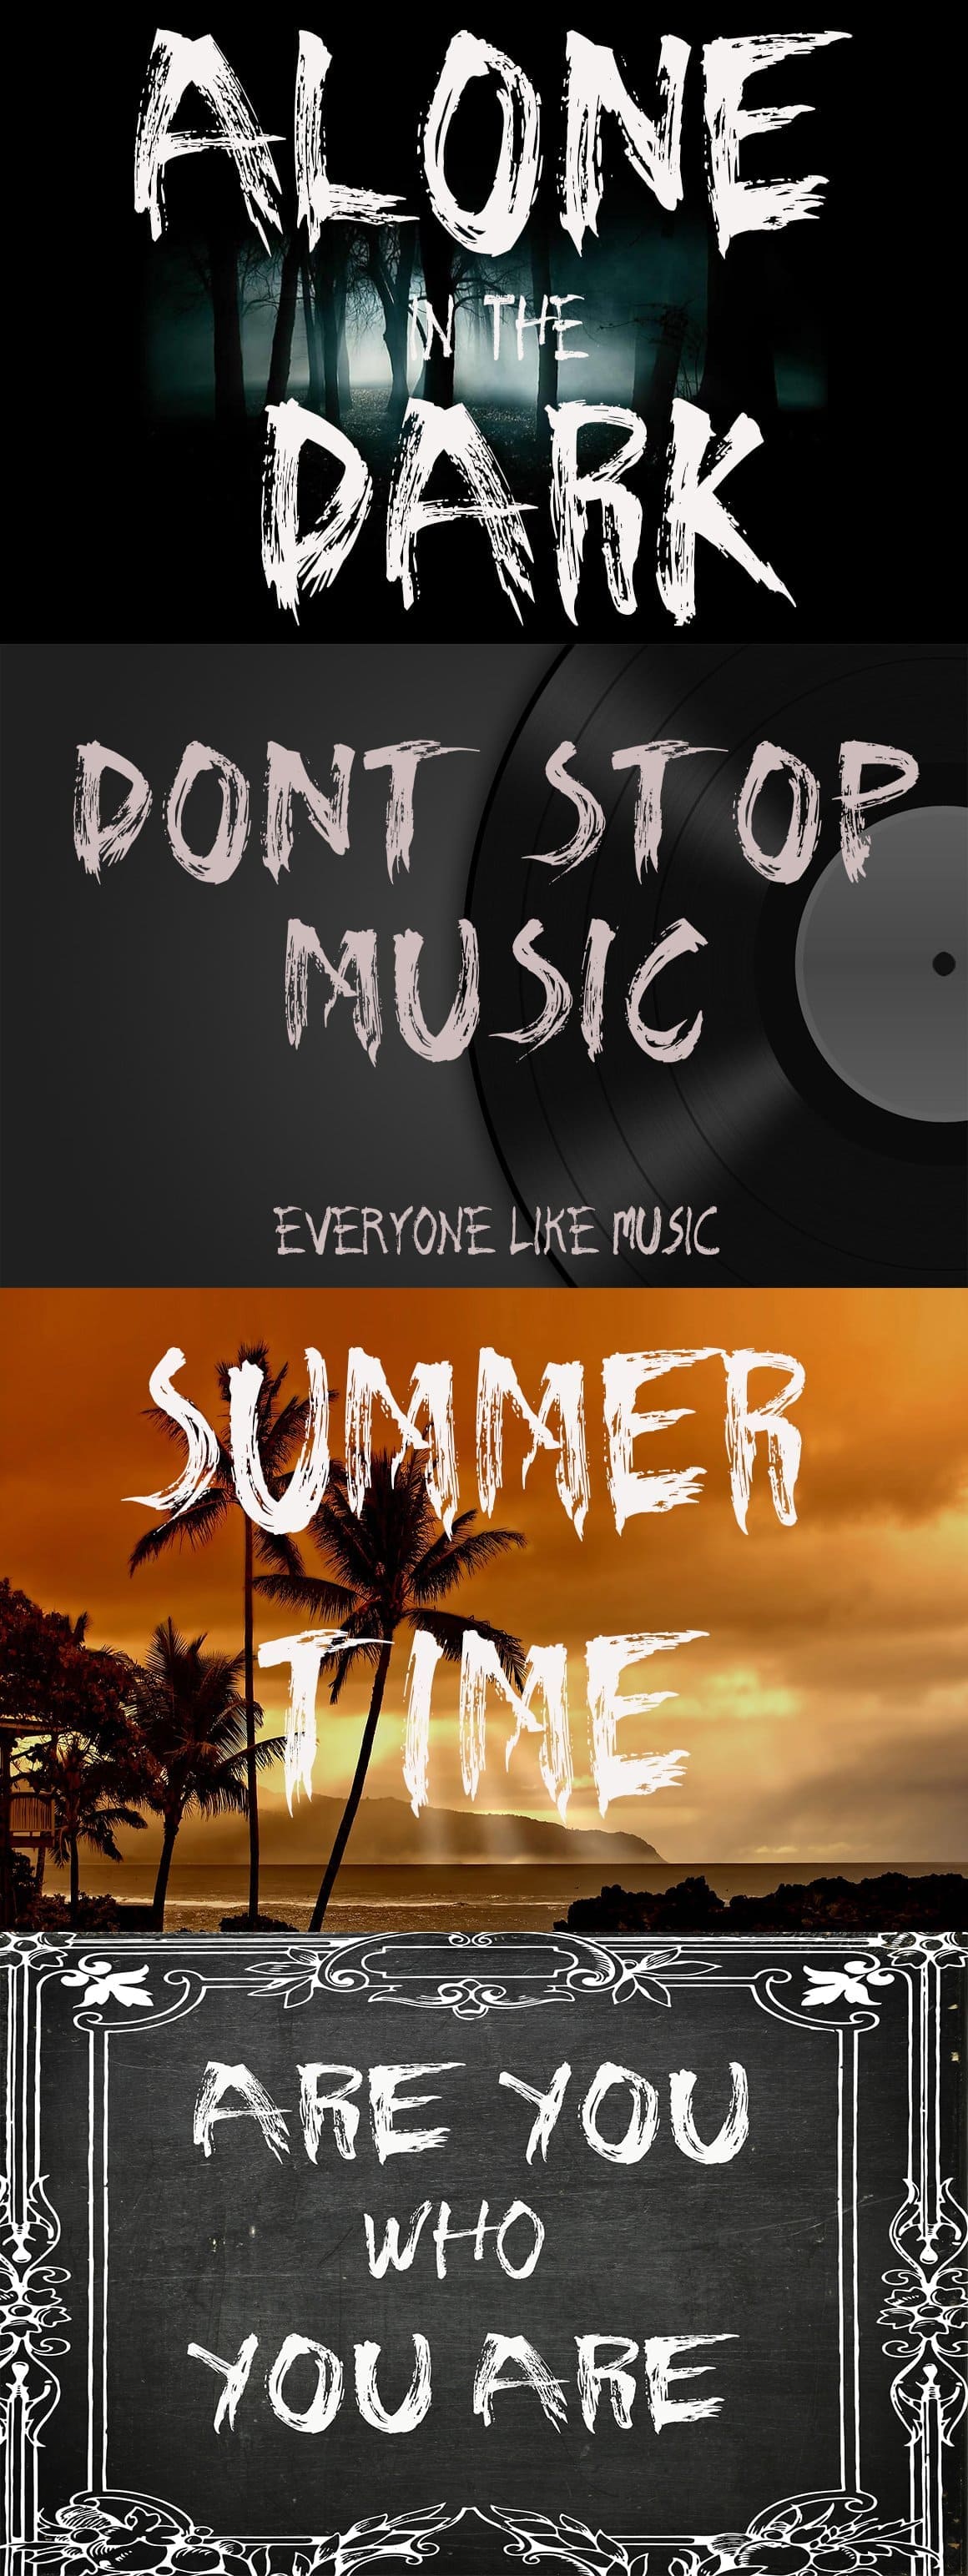 Natural 2 fonts: "Alone in the Dark, Don't stop music".